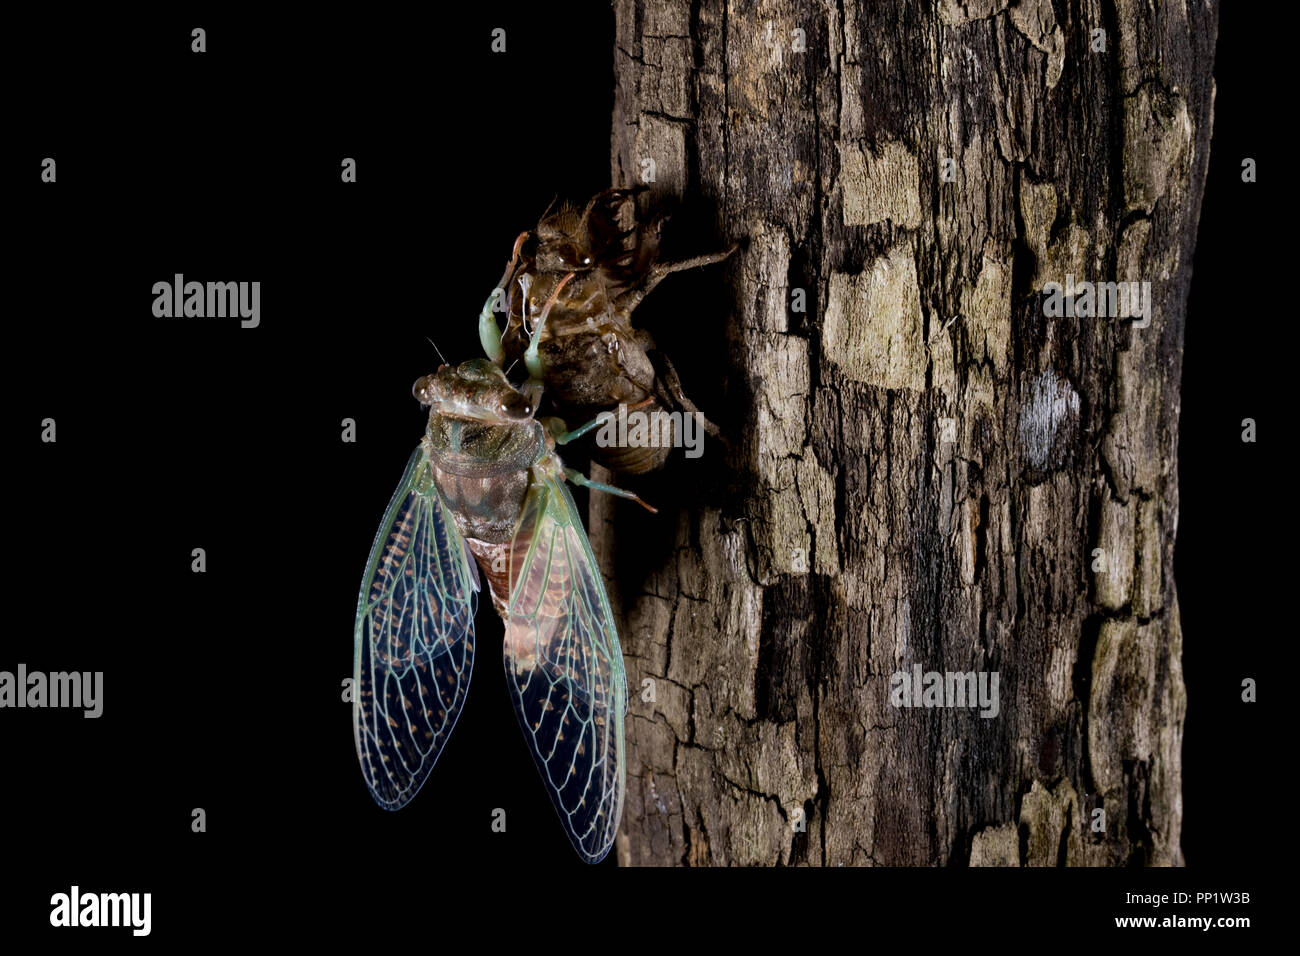 New born adult cicada. Cicada after molting and going through the metamorphosis process. Growing and transforming into adulthood. Winged insect close Stock Photo